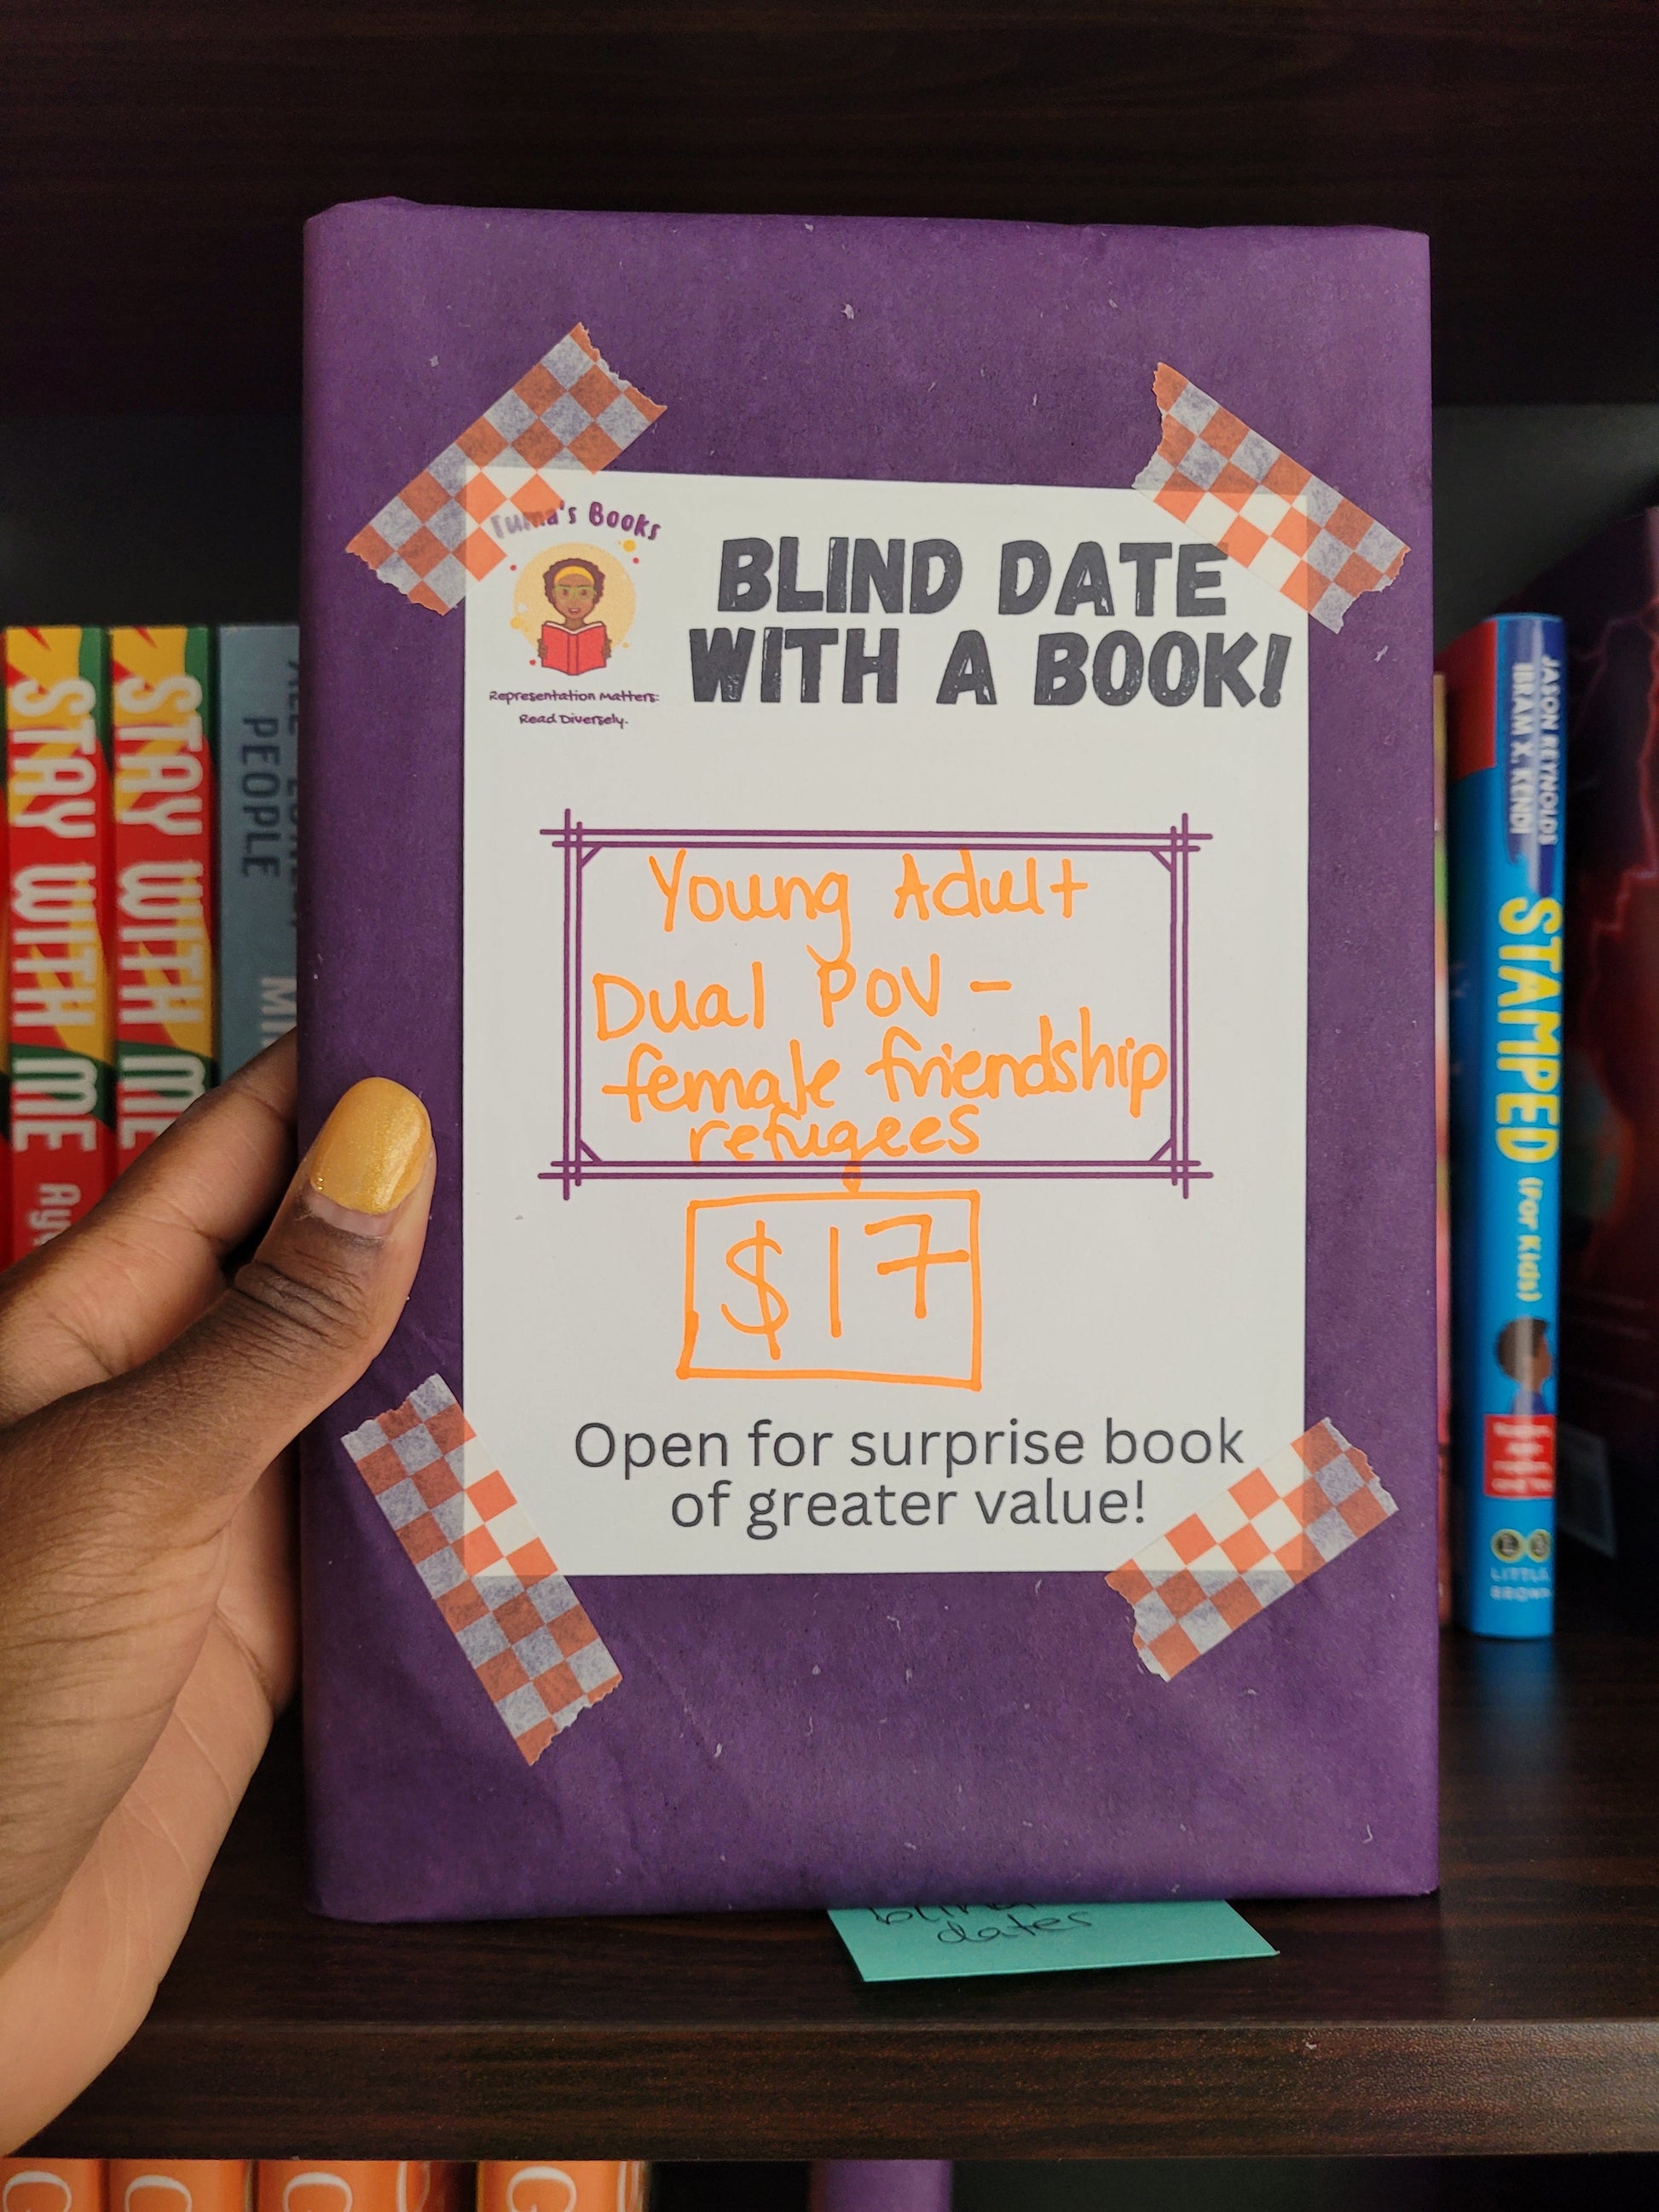 Blind Date with a Book: Young Adult | Dual POV, female friendship, refugees - Tuma's Books